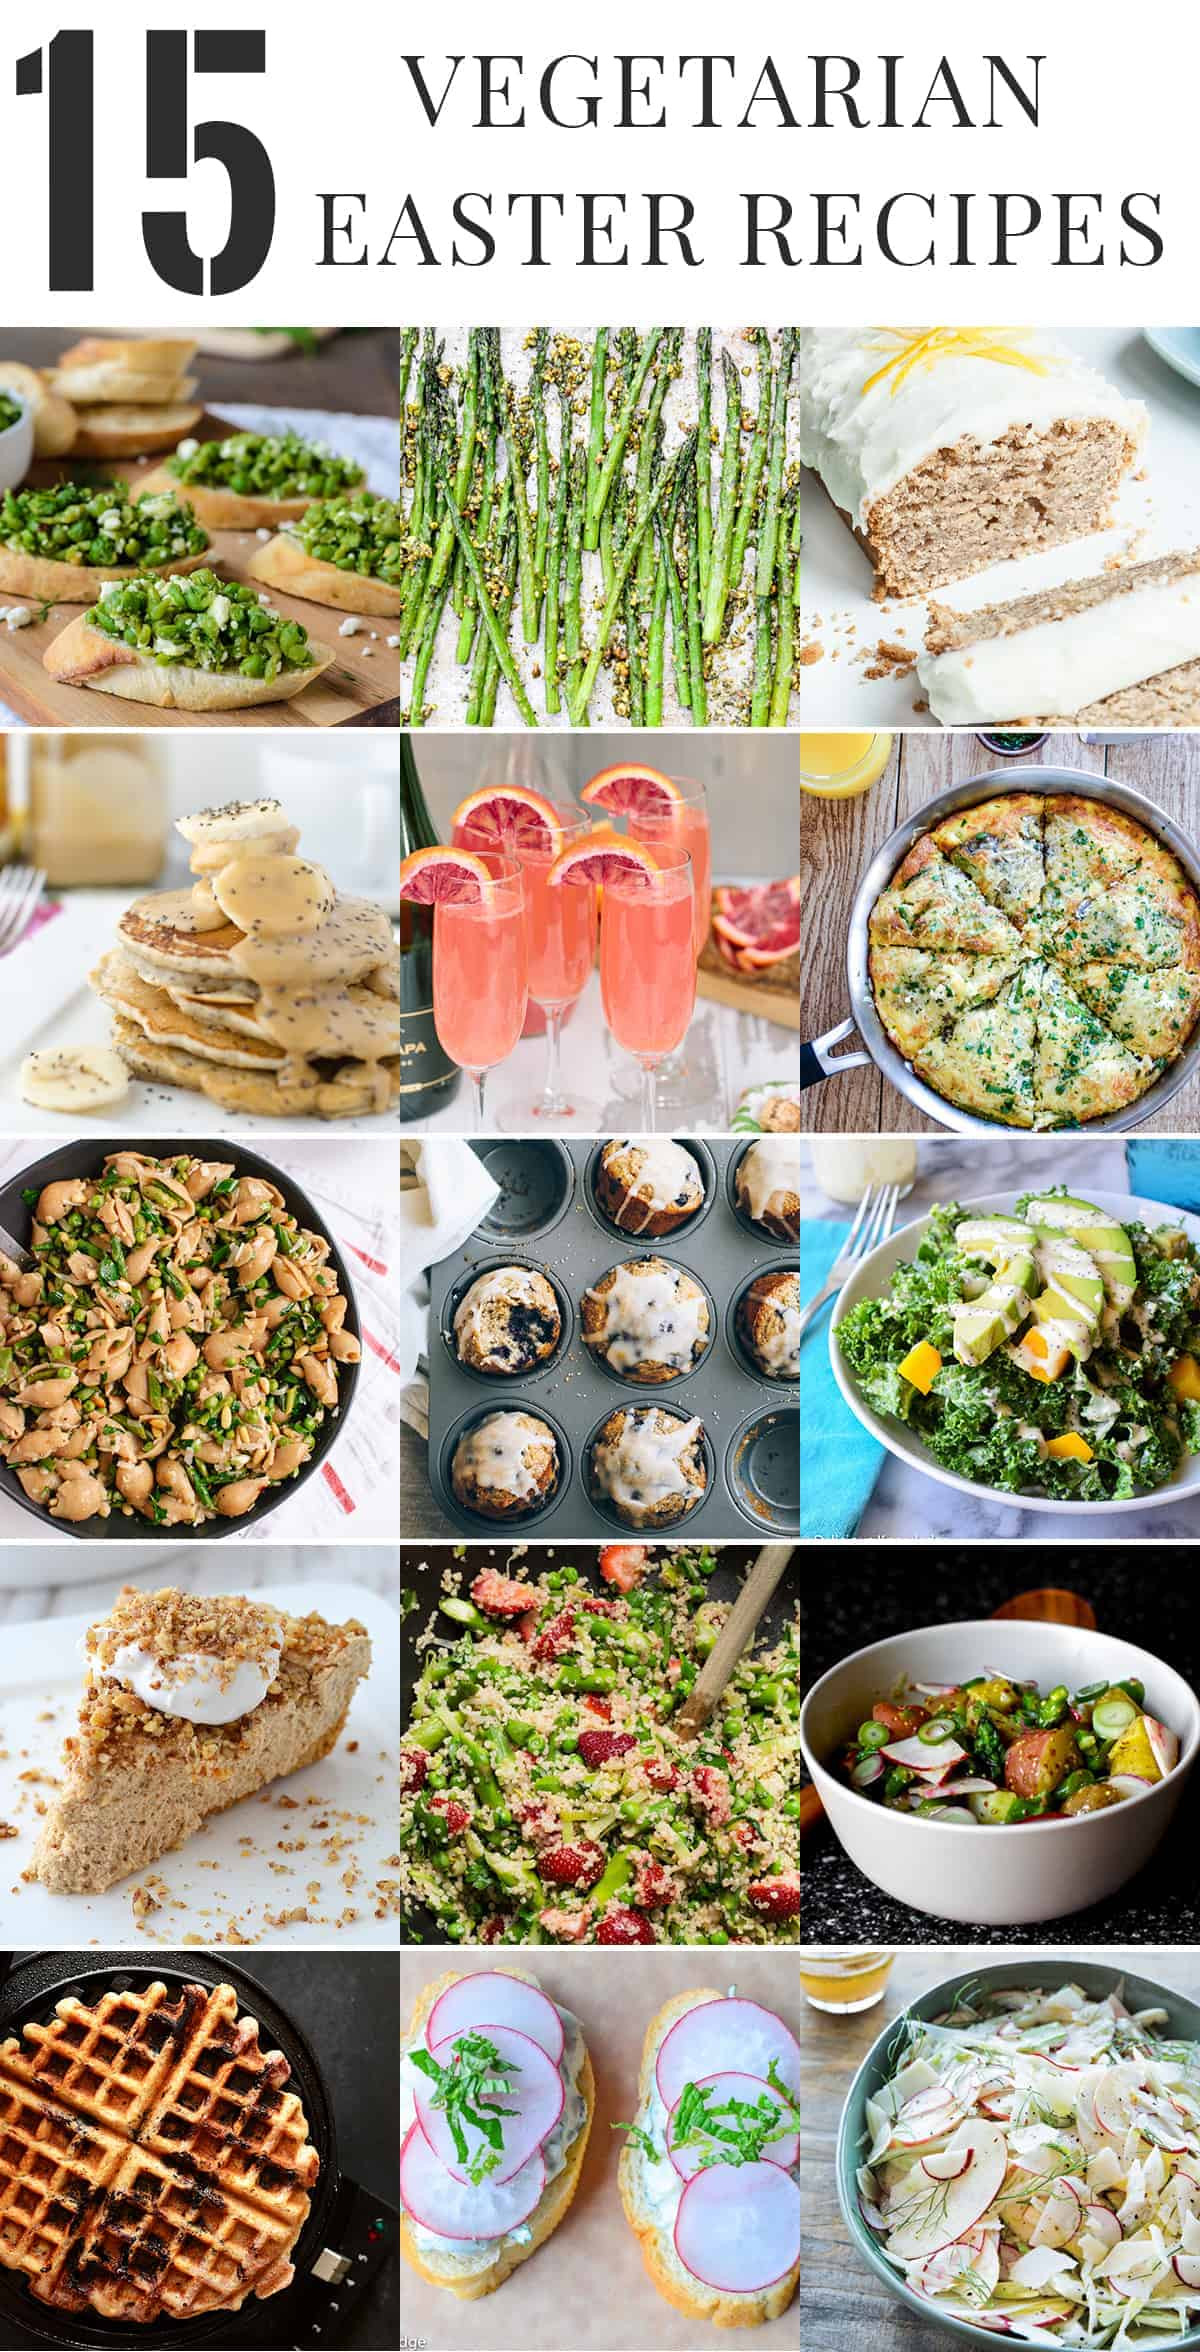 Vegetarian Recipes For Easter
 Healthy Ve arian Easter Recipes Delish Knowledge